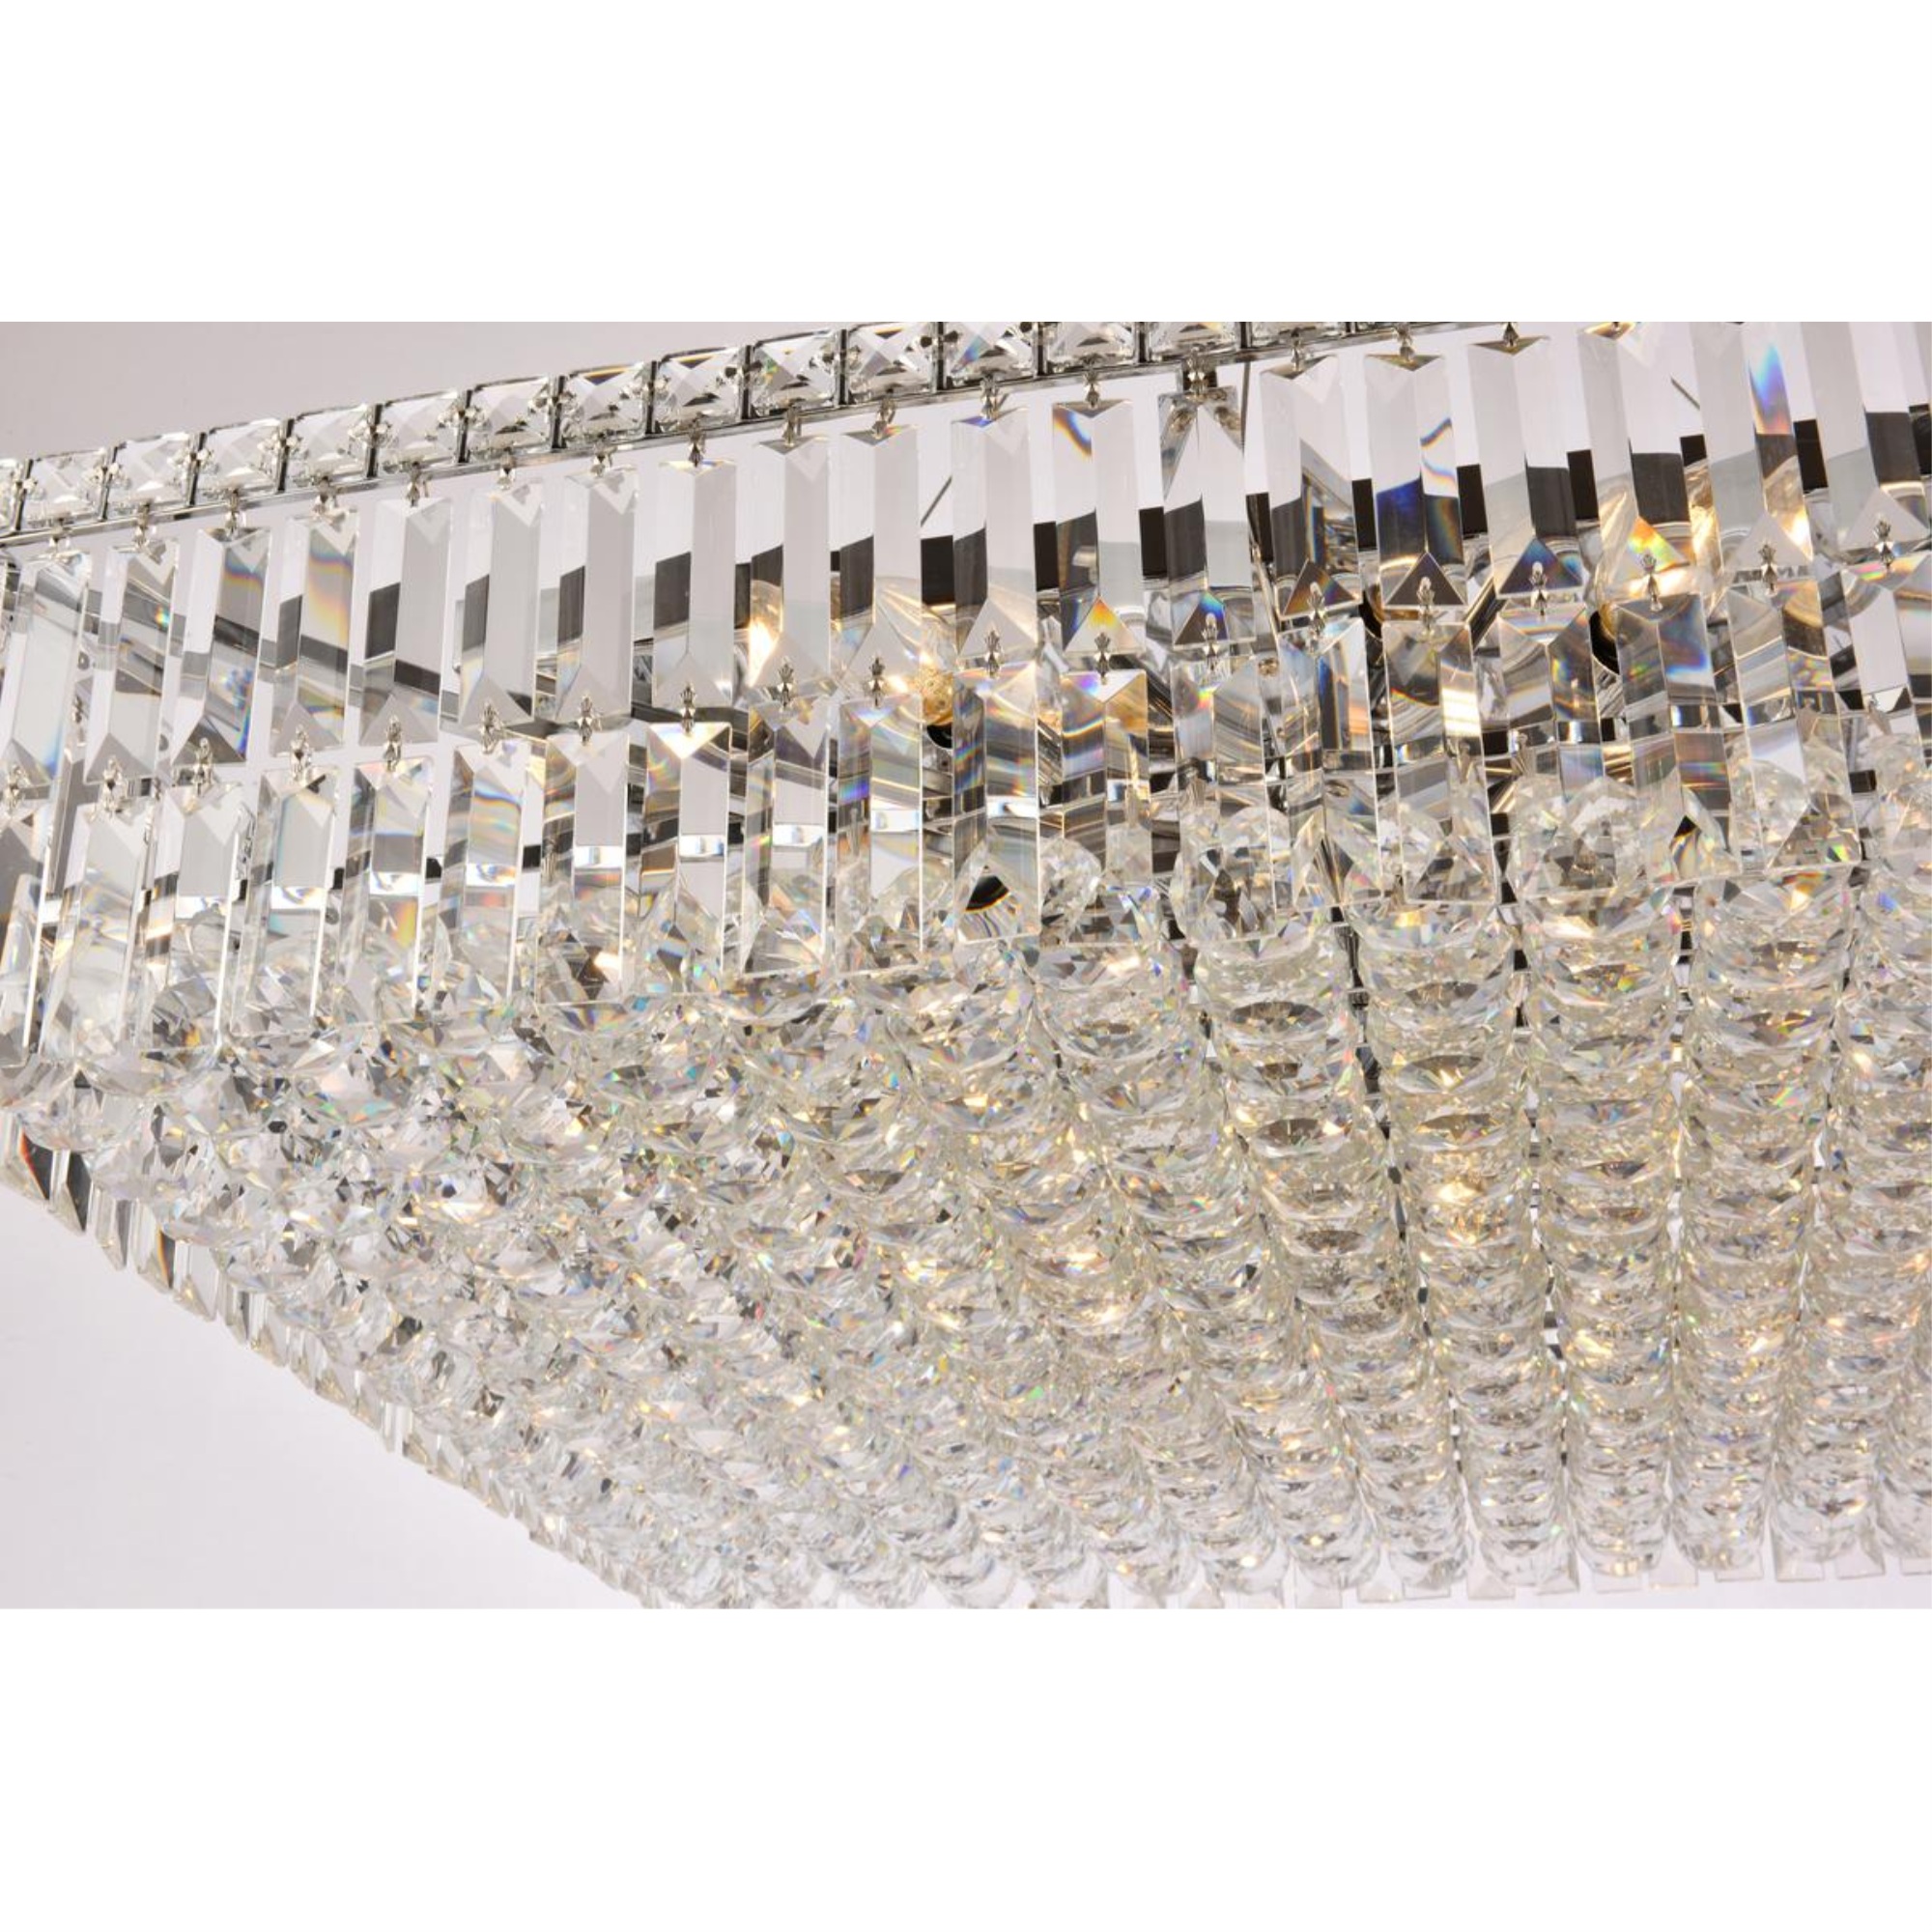 Elegant Lighting 2032 Maxime Collection Hanging Fixture L28in W28in  H7.5in Lt:12 Chrome Finish (Royal Cut Crystals)